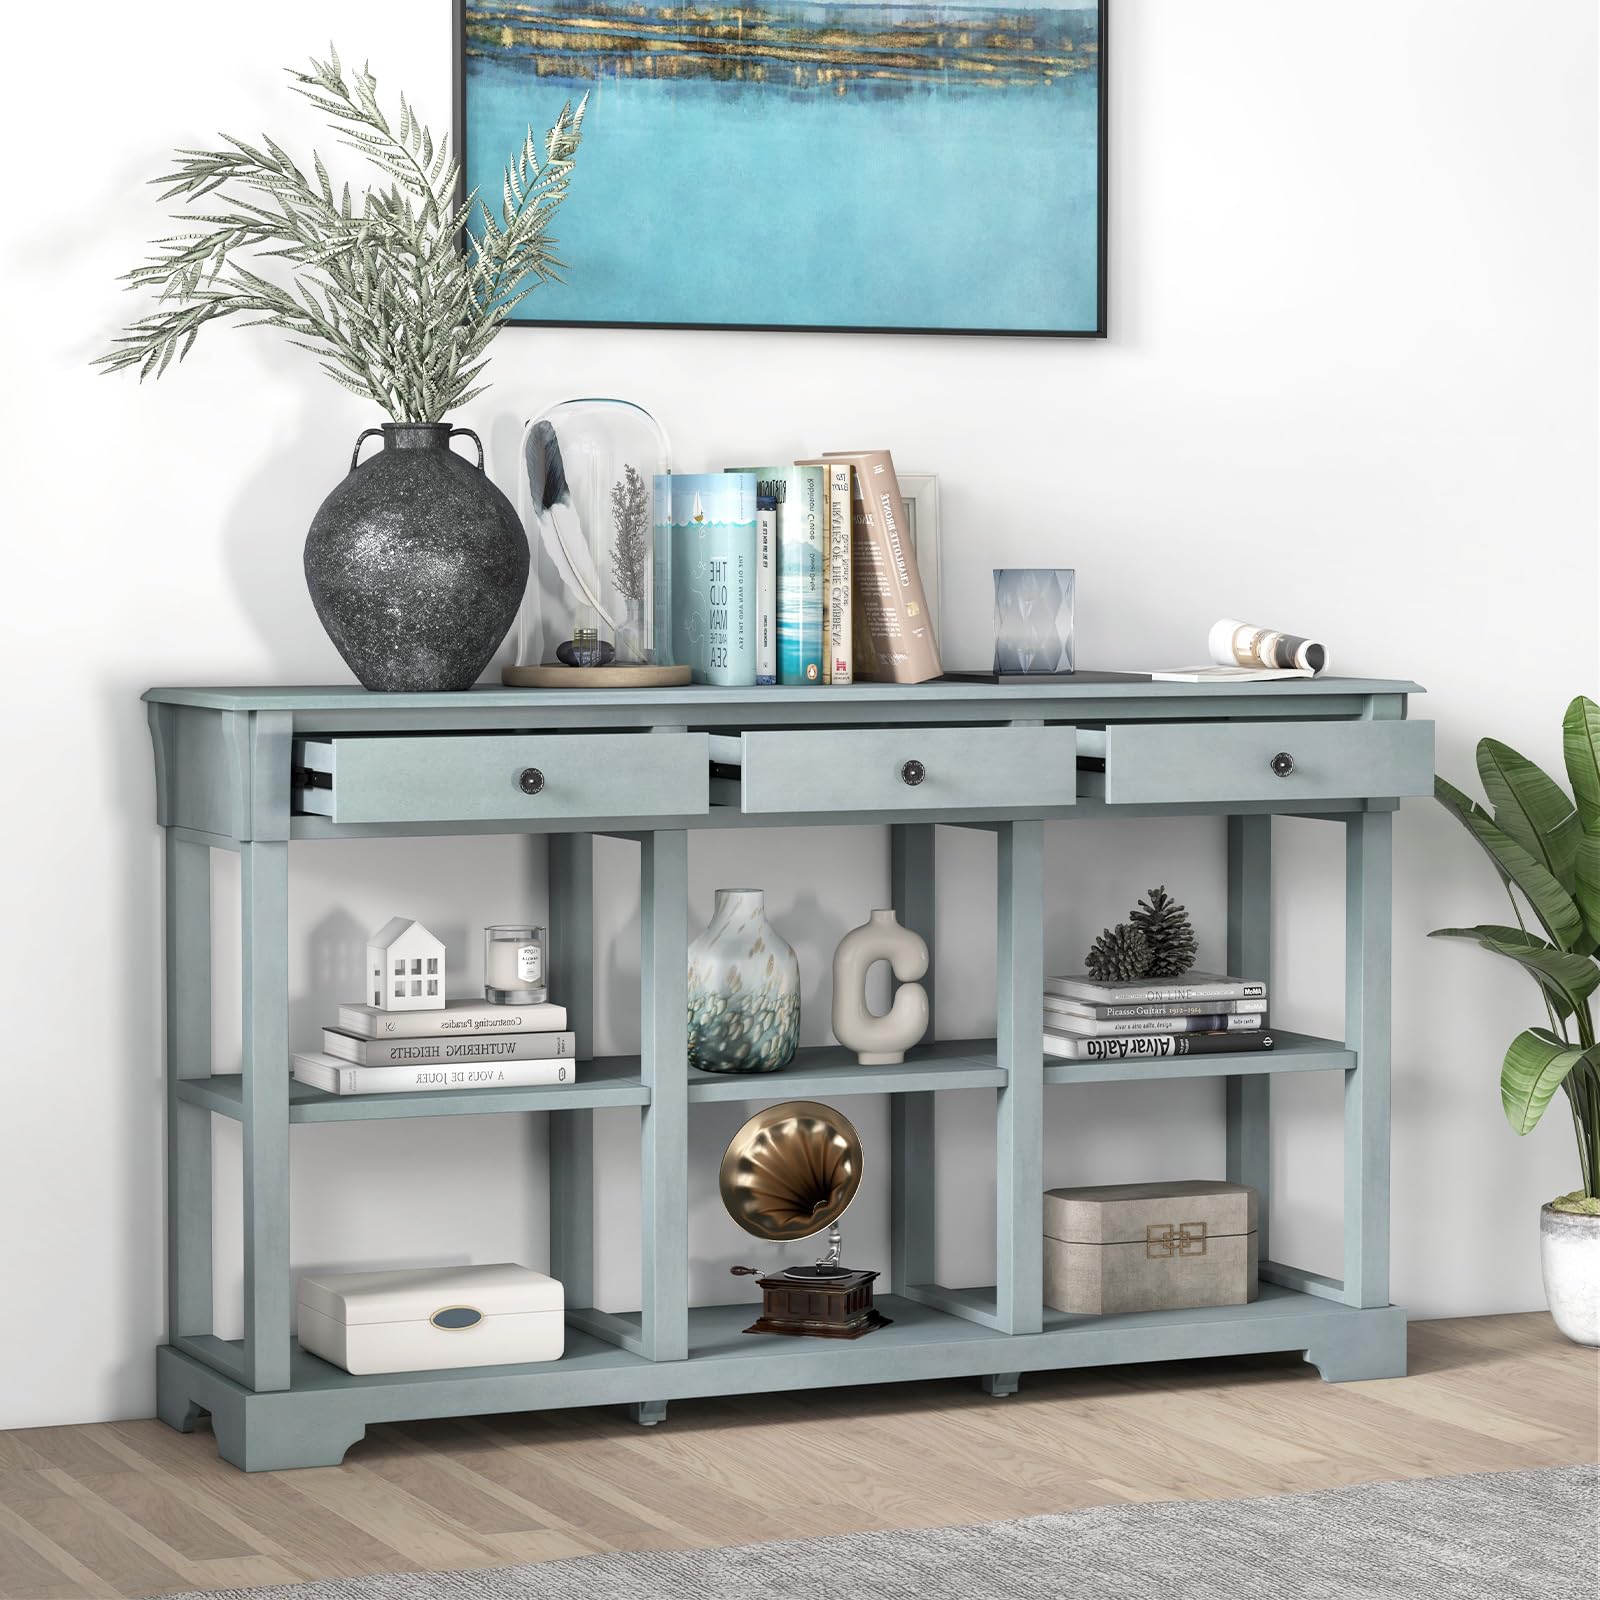 Giantex Console Table with Storage, 58” Long Sofa Table with 3 Drawers & Open Shelves